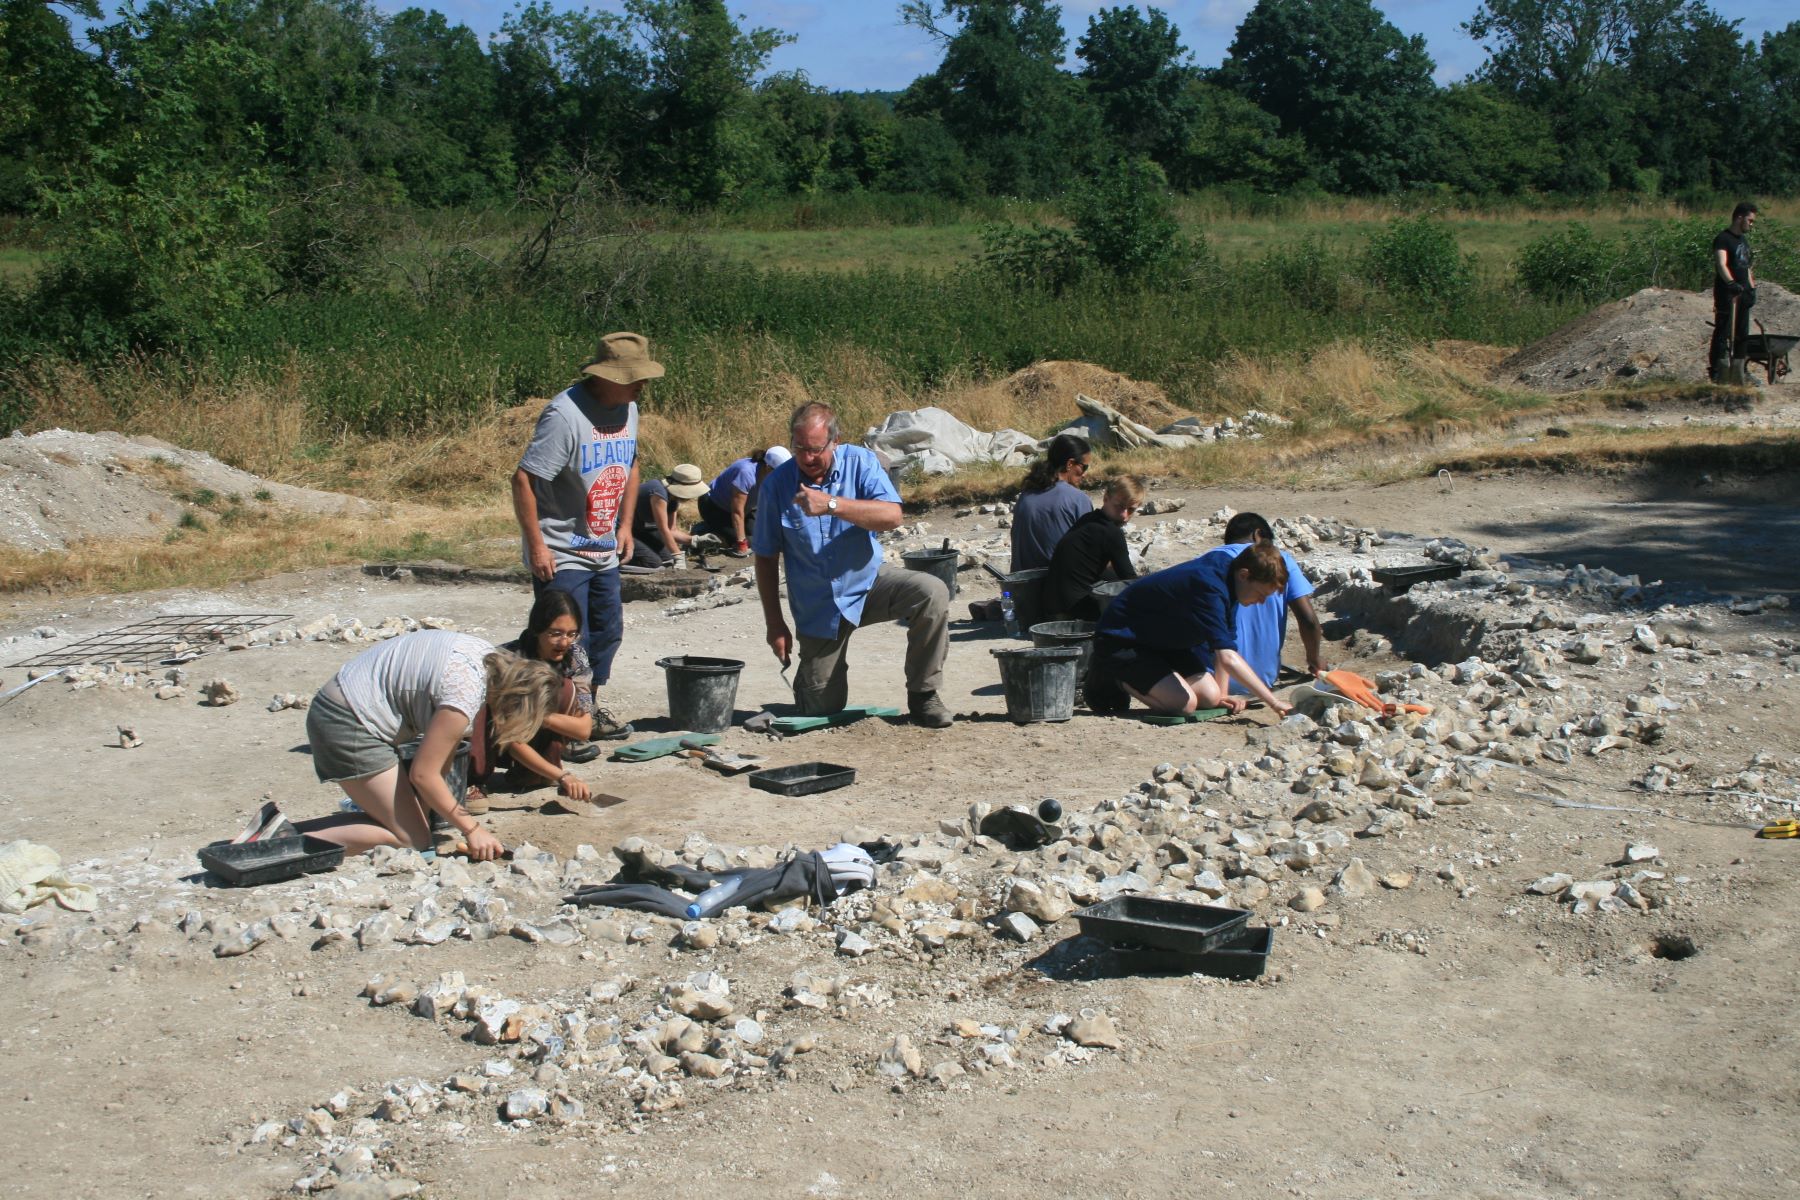 Archaeologist at work on dig site